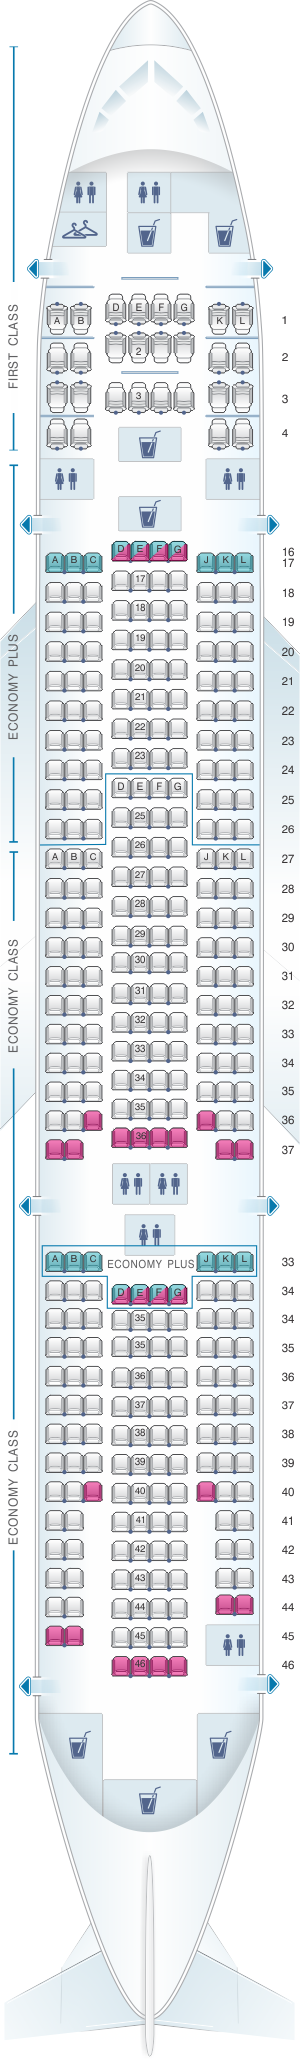 Seat map for United Airlines Boeing B777 200 (777) - version 2